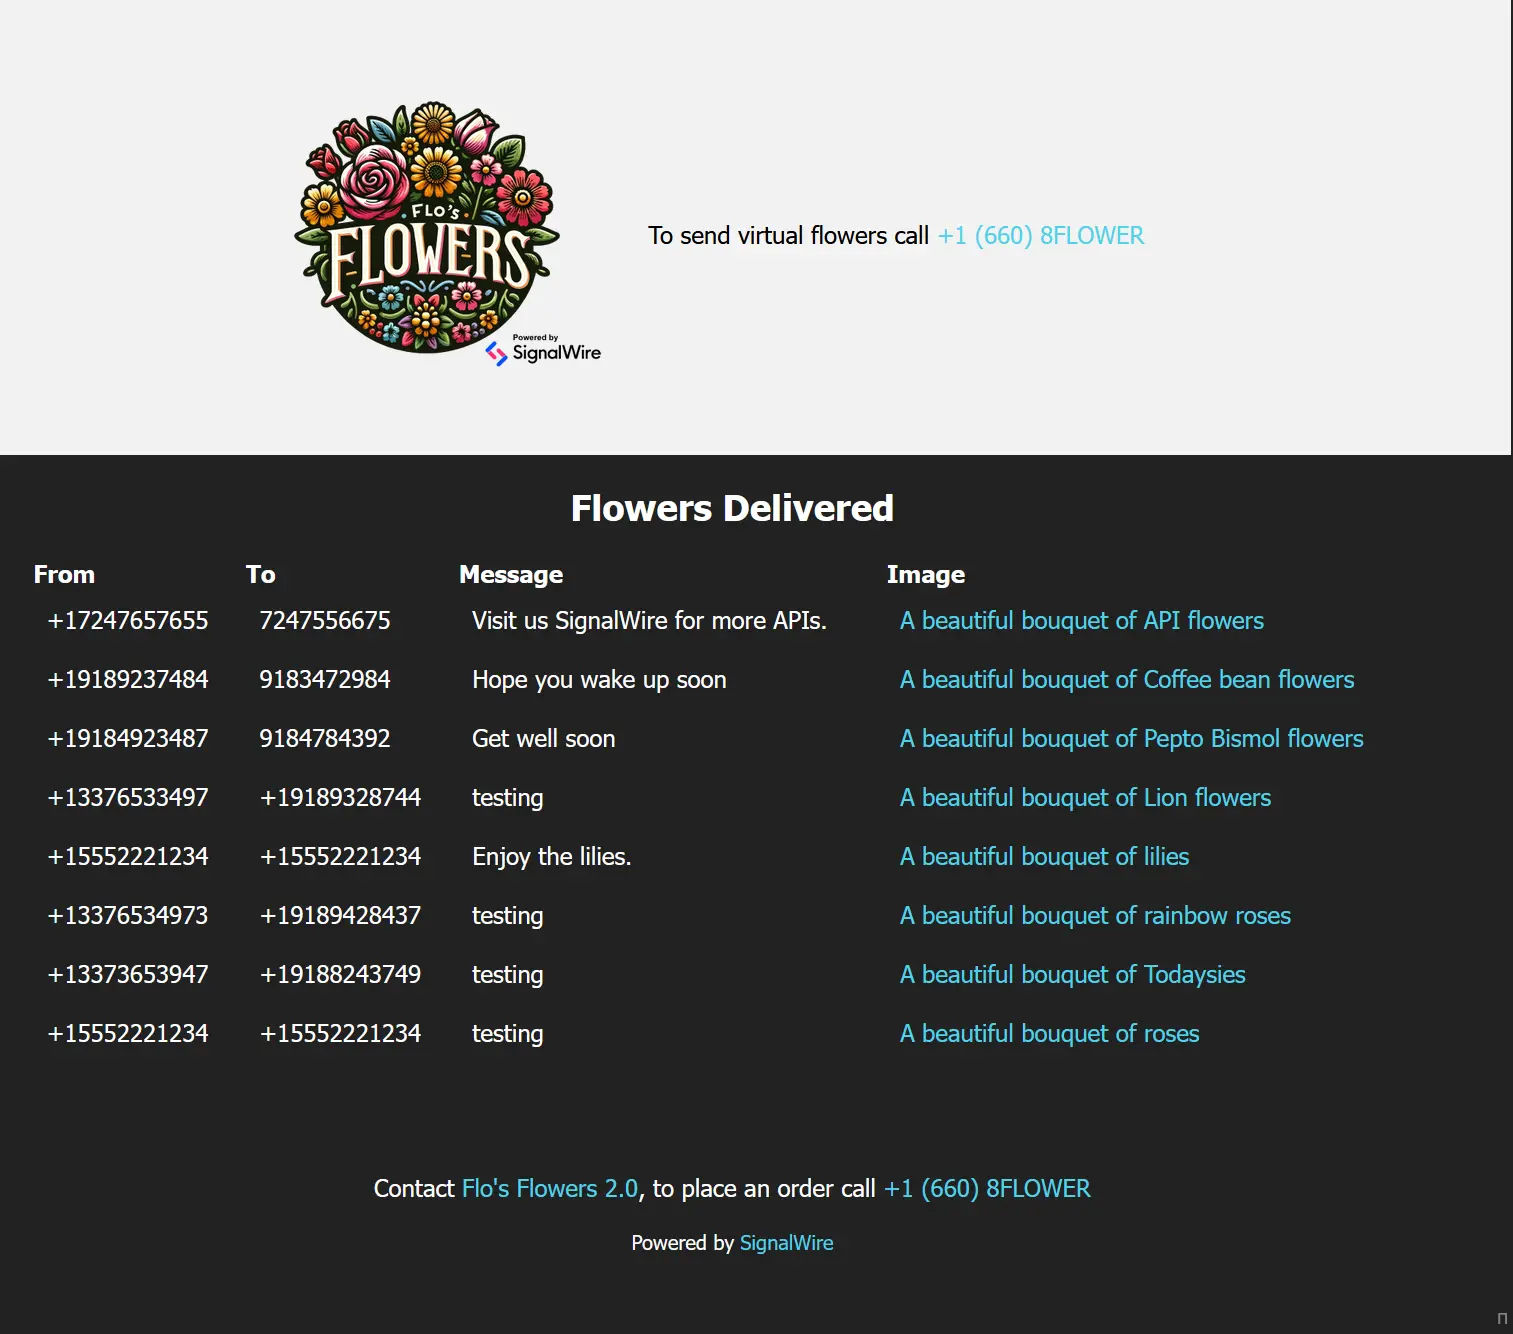 A screenshot of the Flo's Flowers 2.0 web interface.